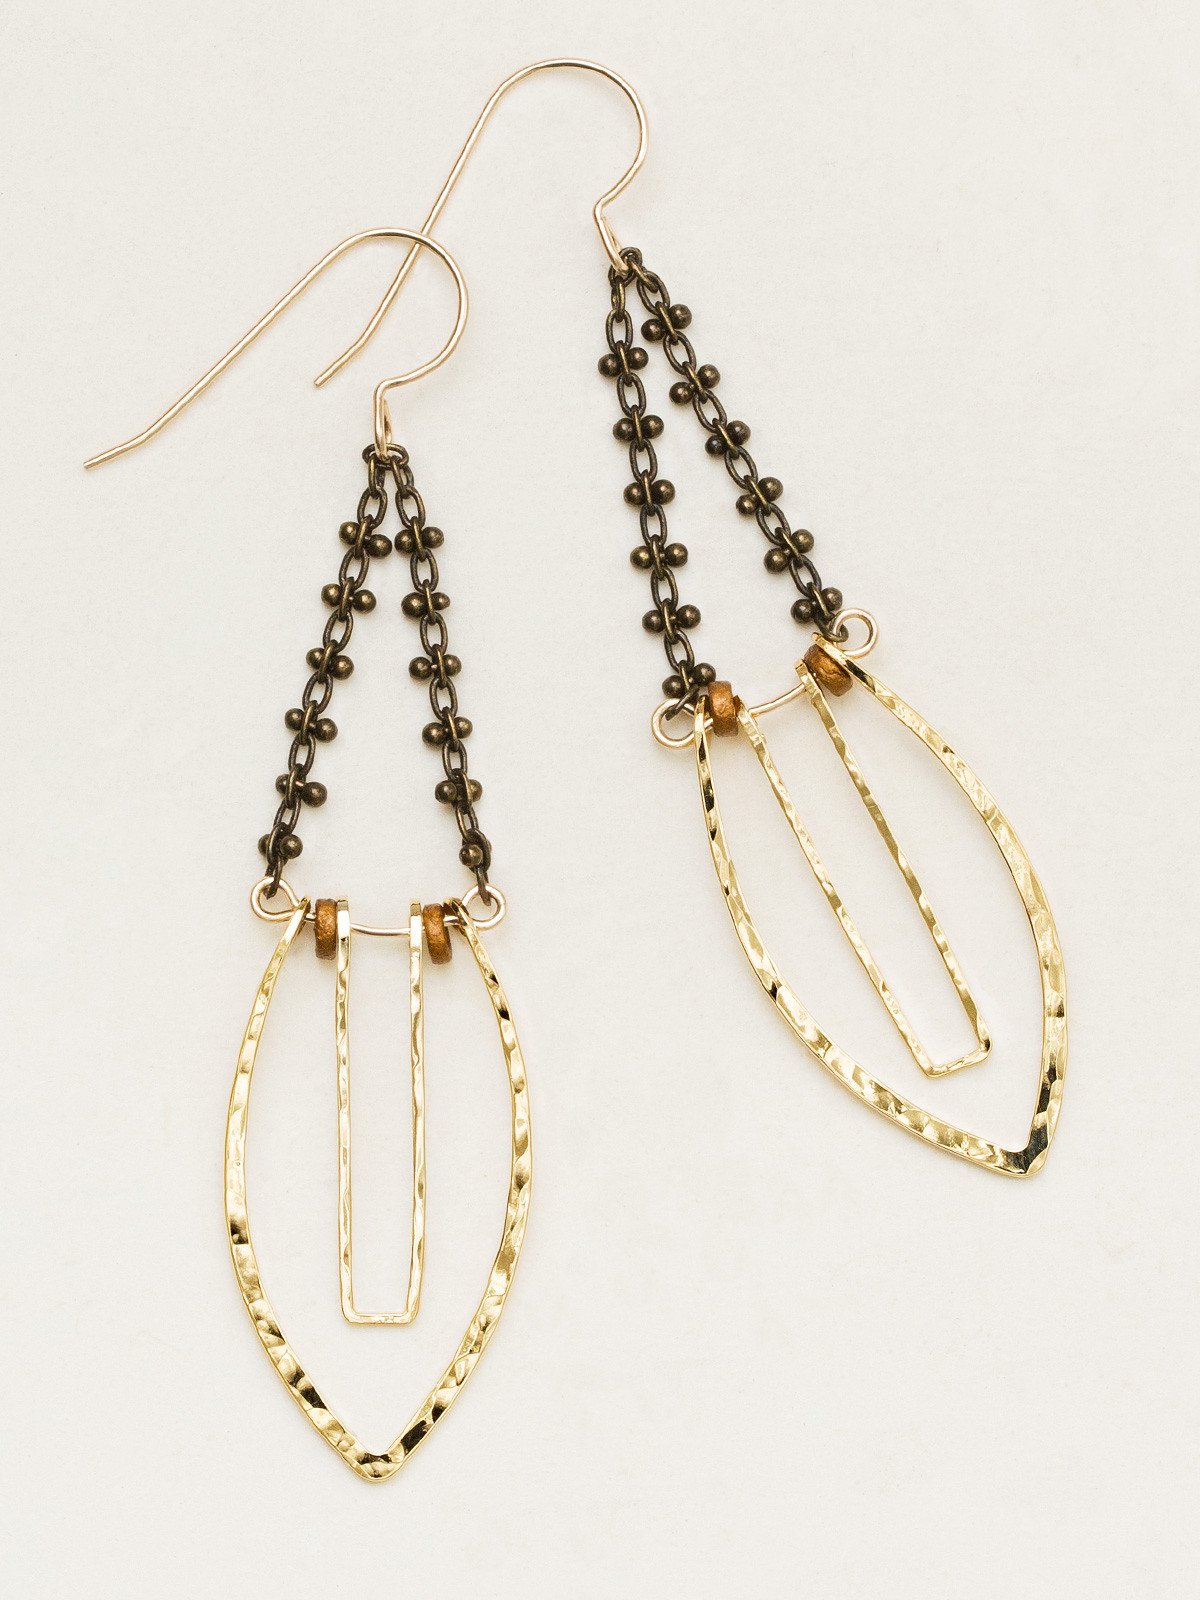 Handmade Goldtone and brown Statement earrings by Holly Yashi